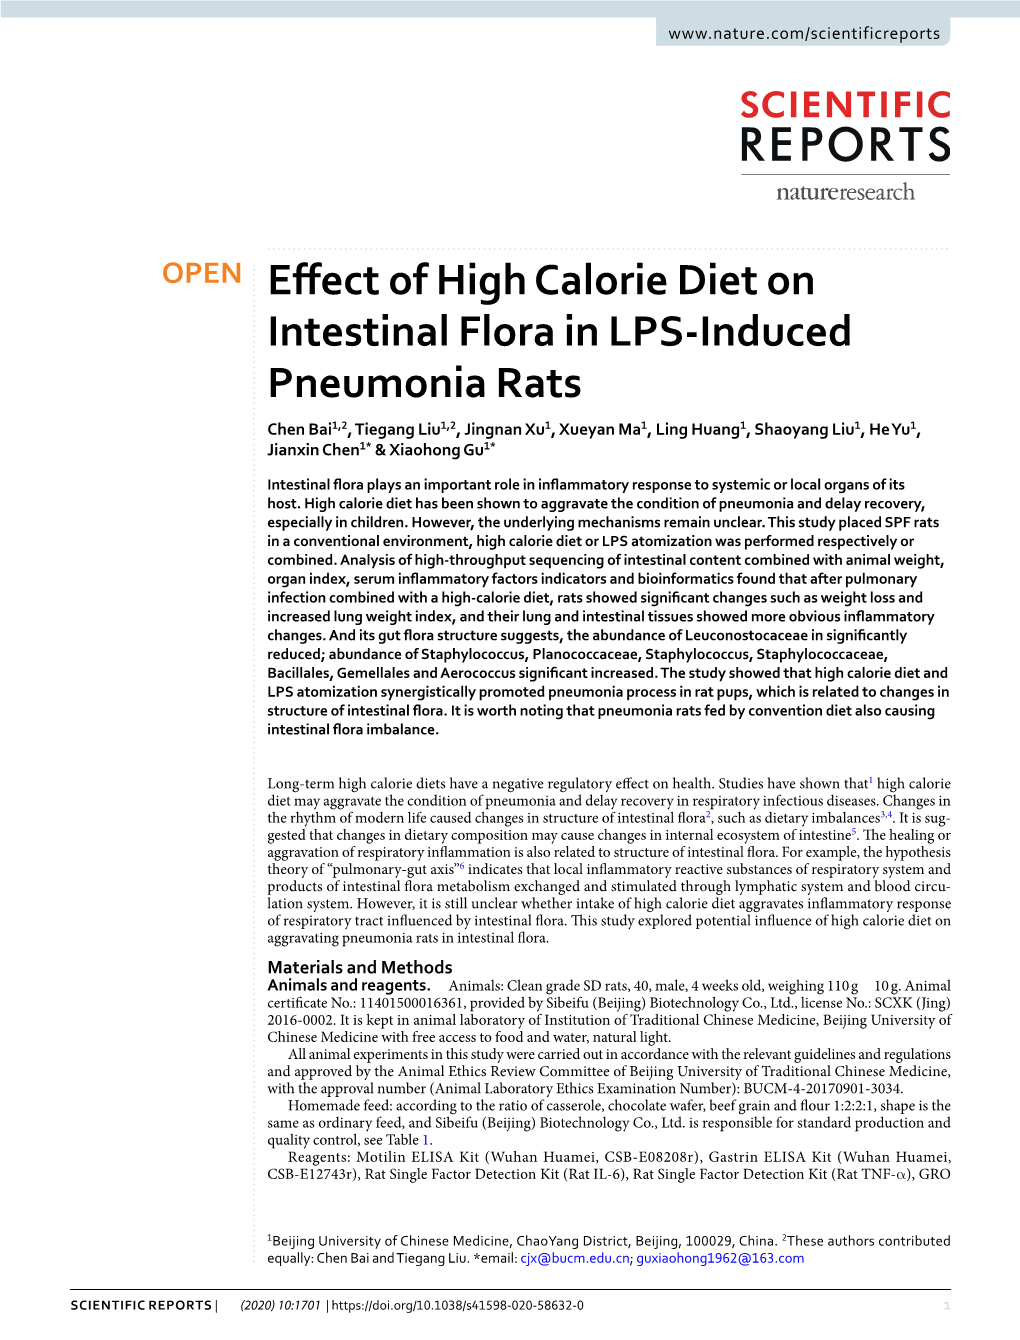 Effect of High Calorie Diet on Intestinal Flora in LPS-Induced Pneumonia